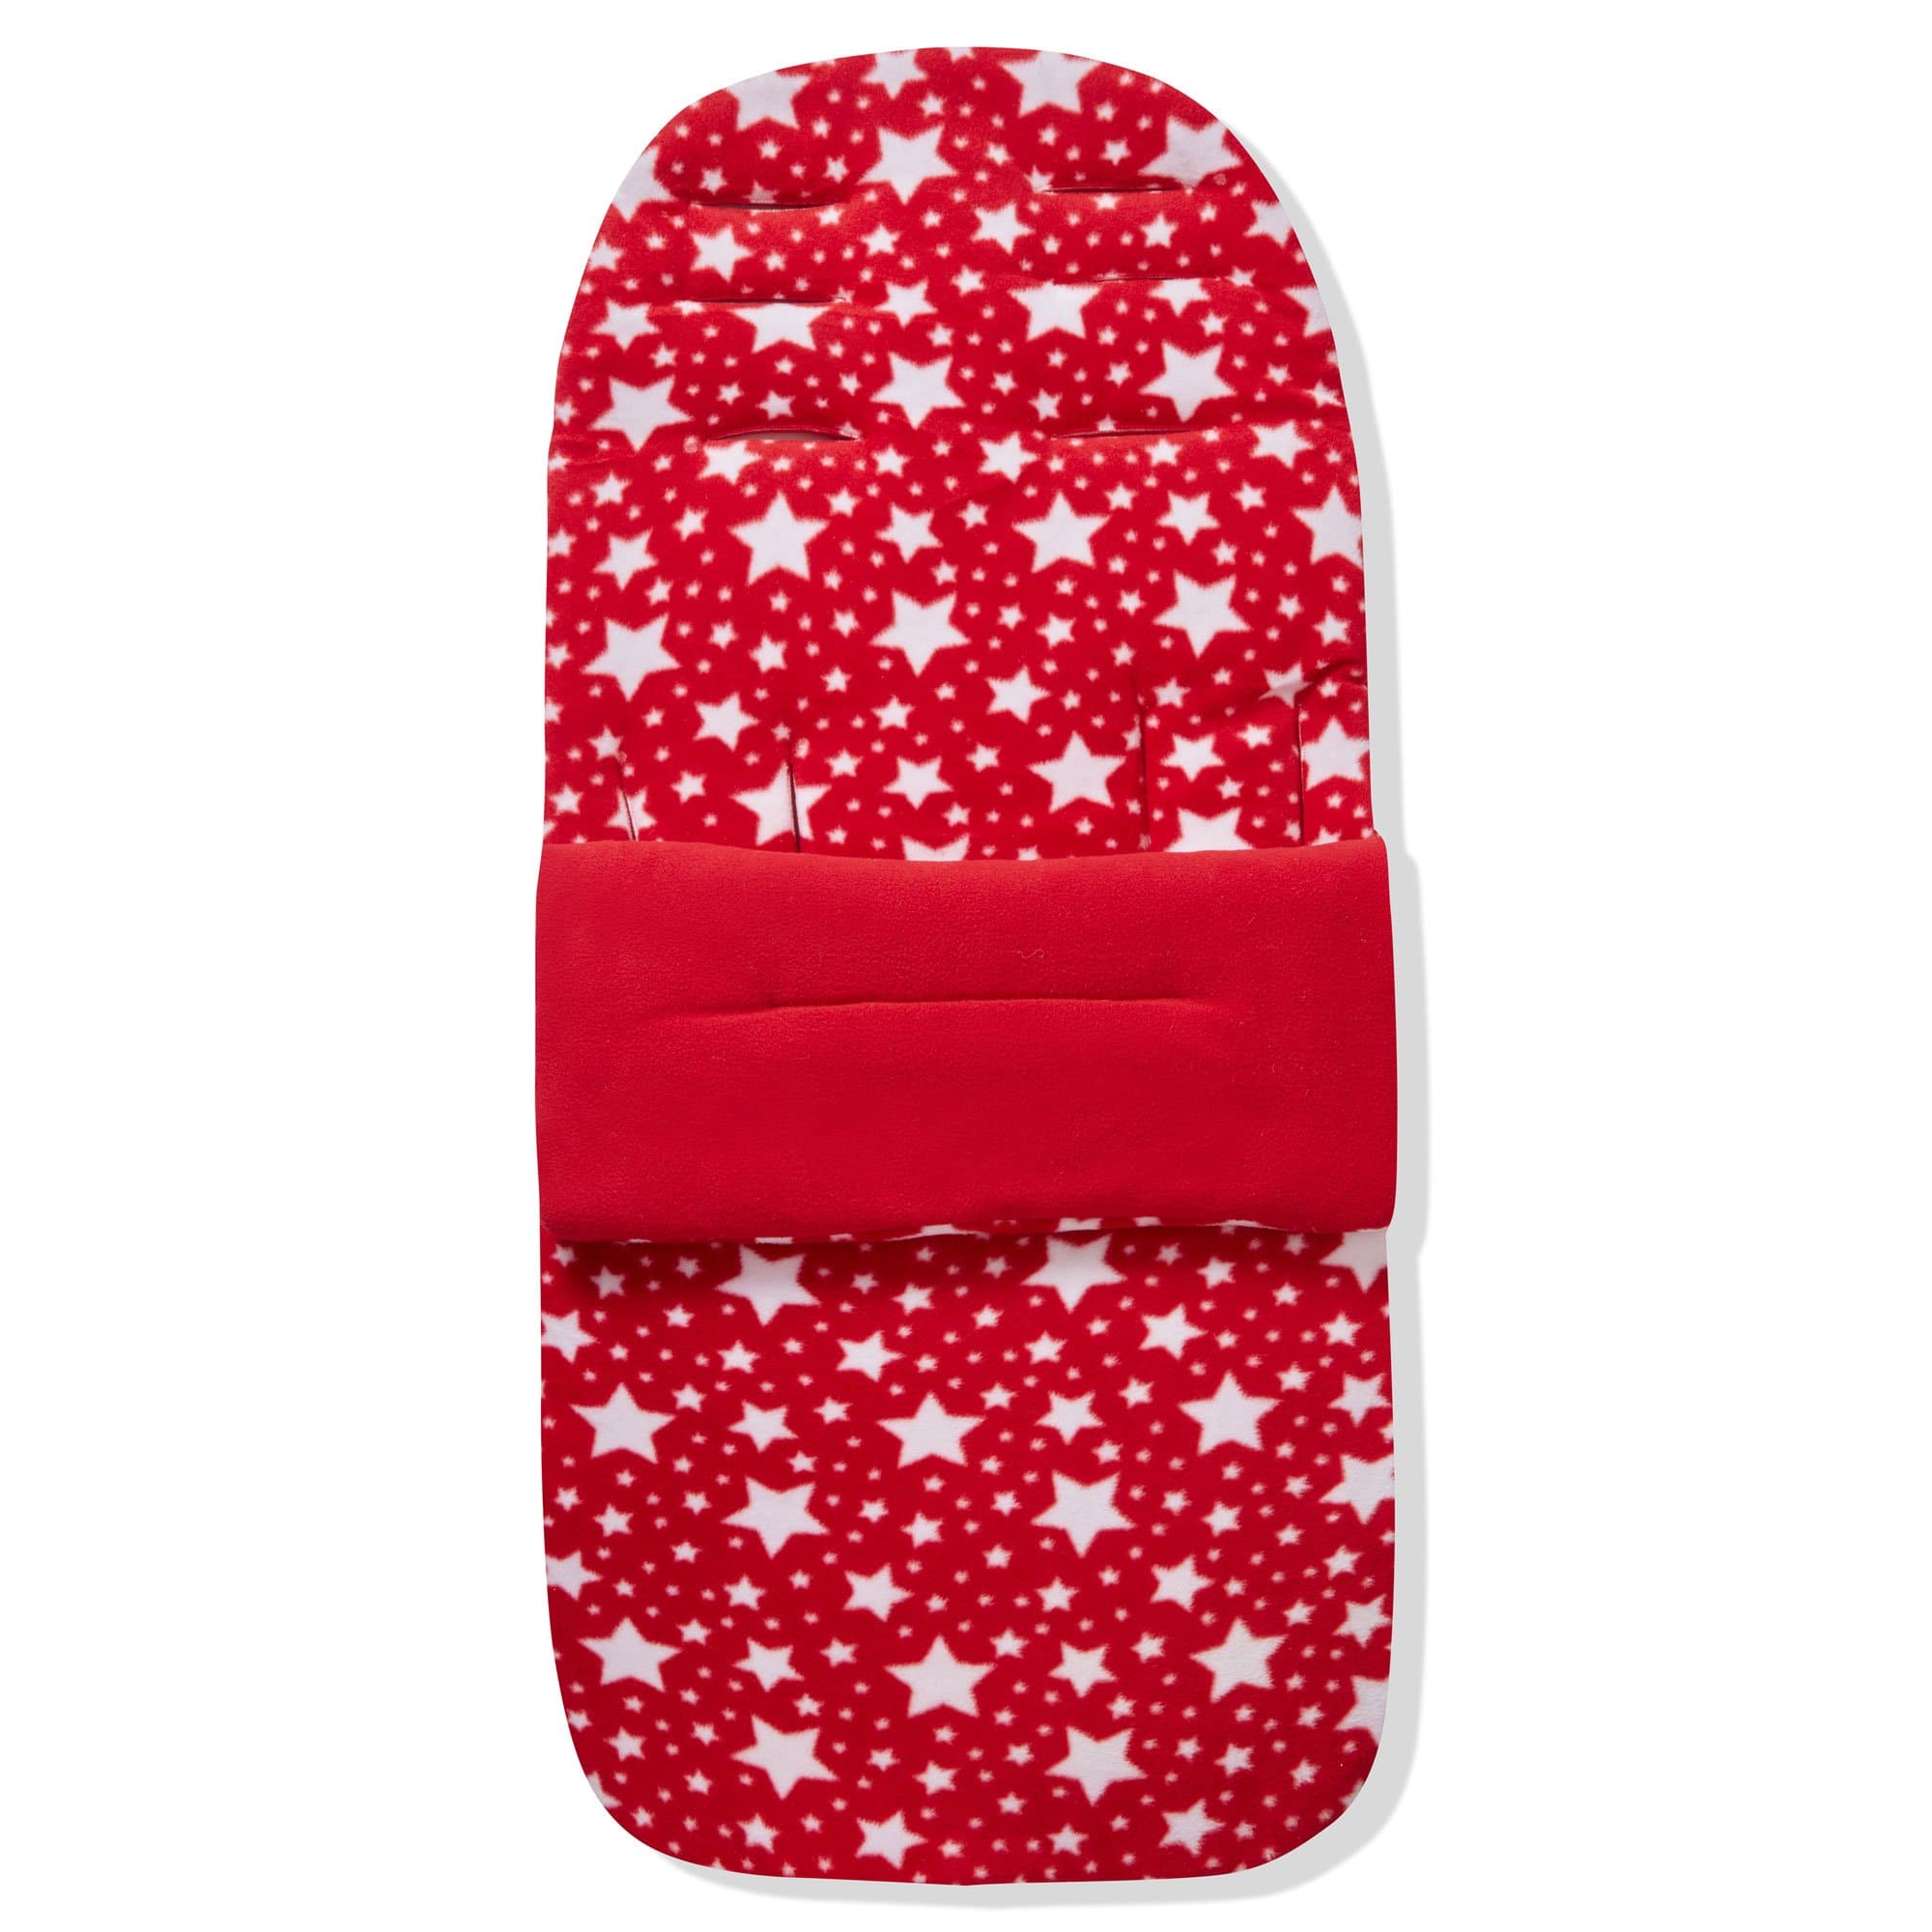 Fleece Footmuff / Cosy Toes Compatible With Bloom - For Your Little One